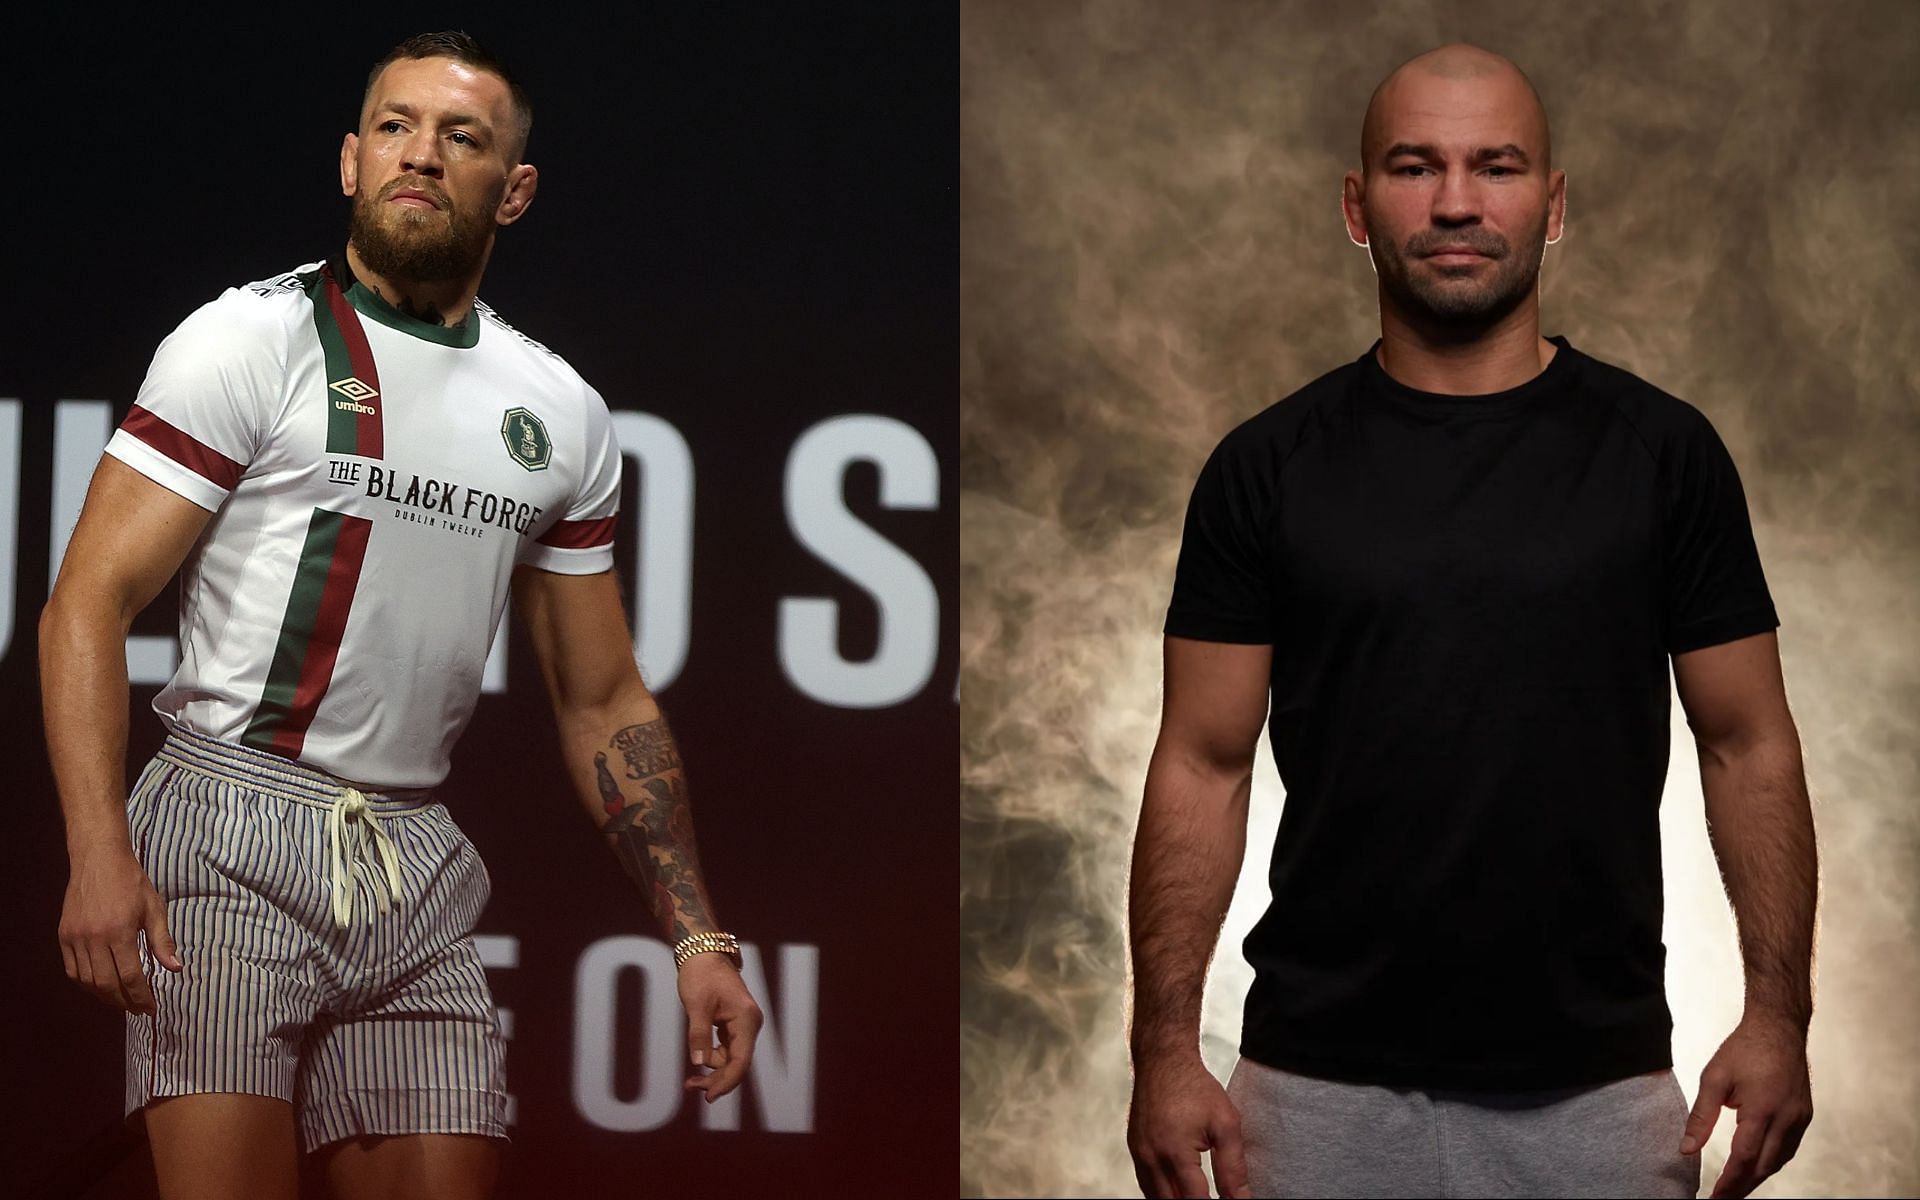 Conor Mcgregor (left) and Artem Lobov (right)[Image Courtesy: Getty Images and @rushammer on Instagram]